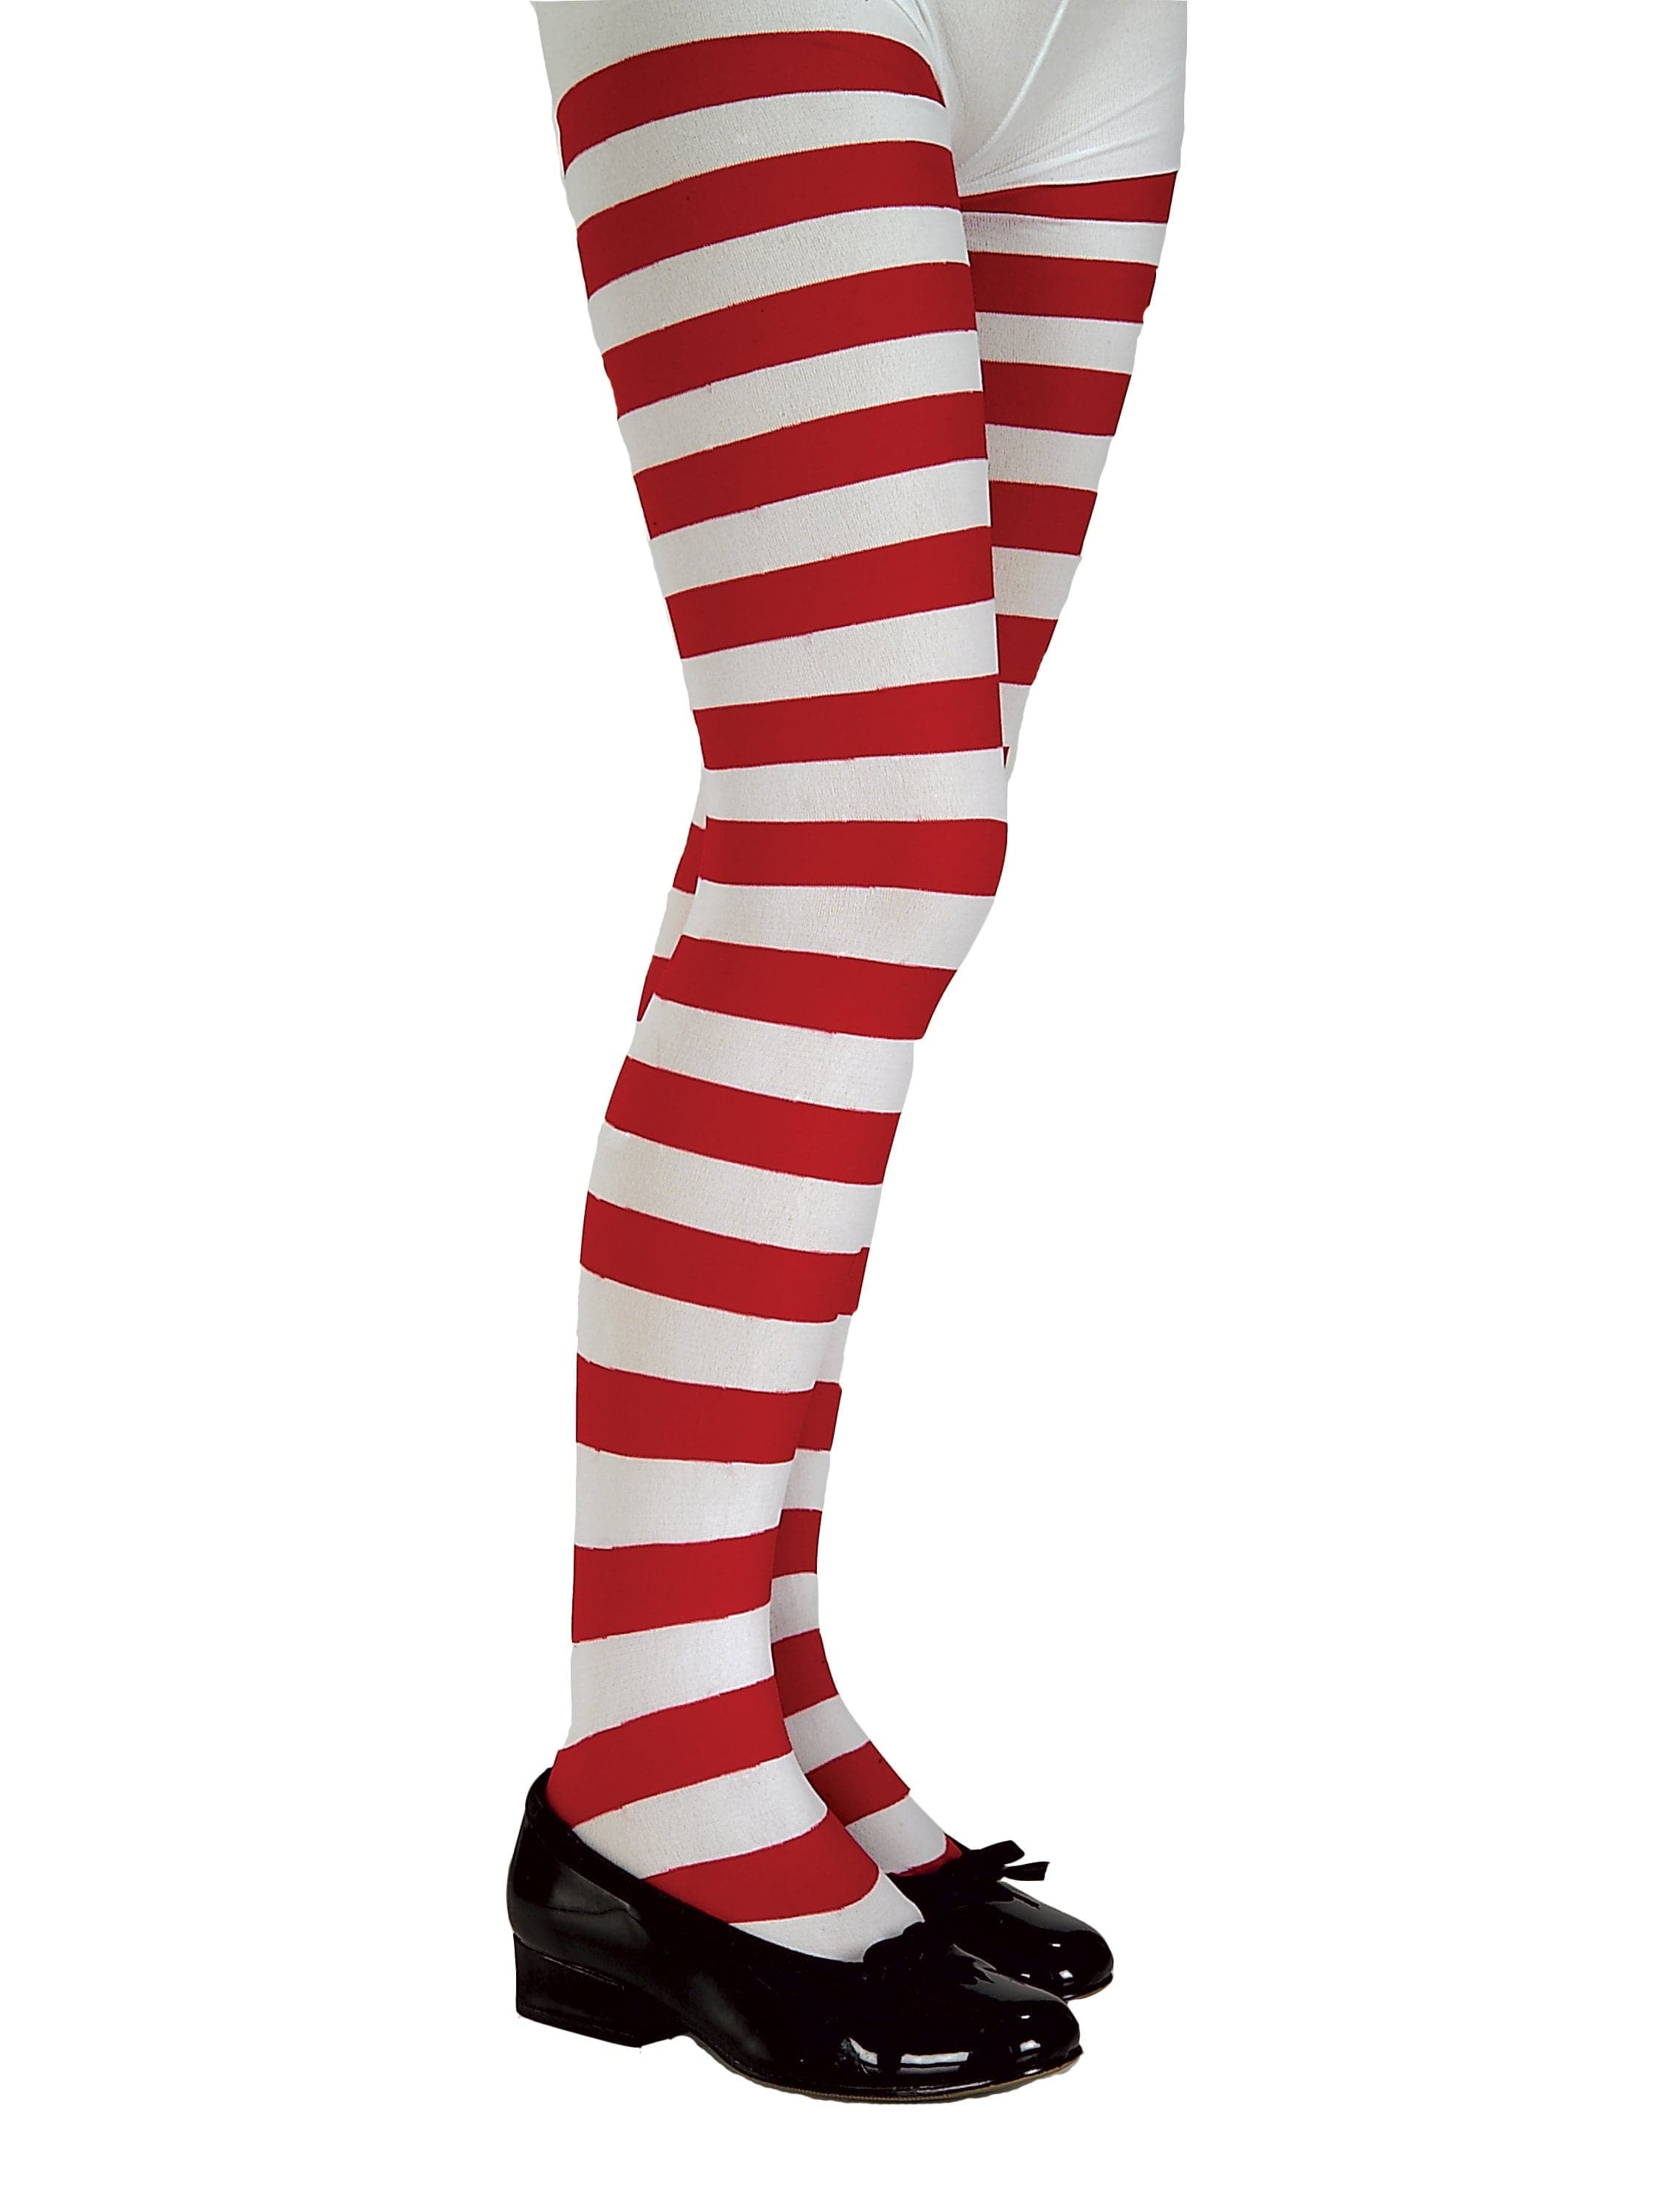 Kids' Red and White Striped Tights - costumes.com